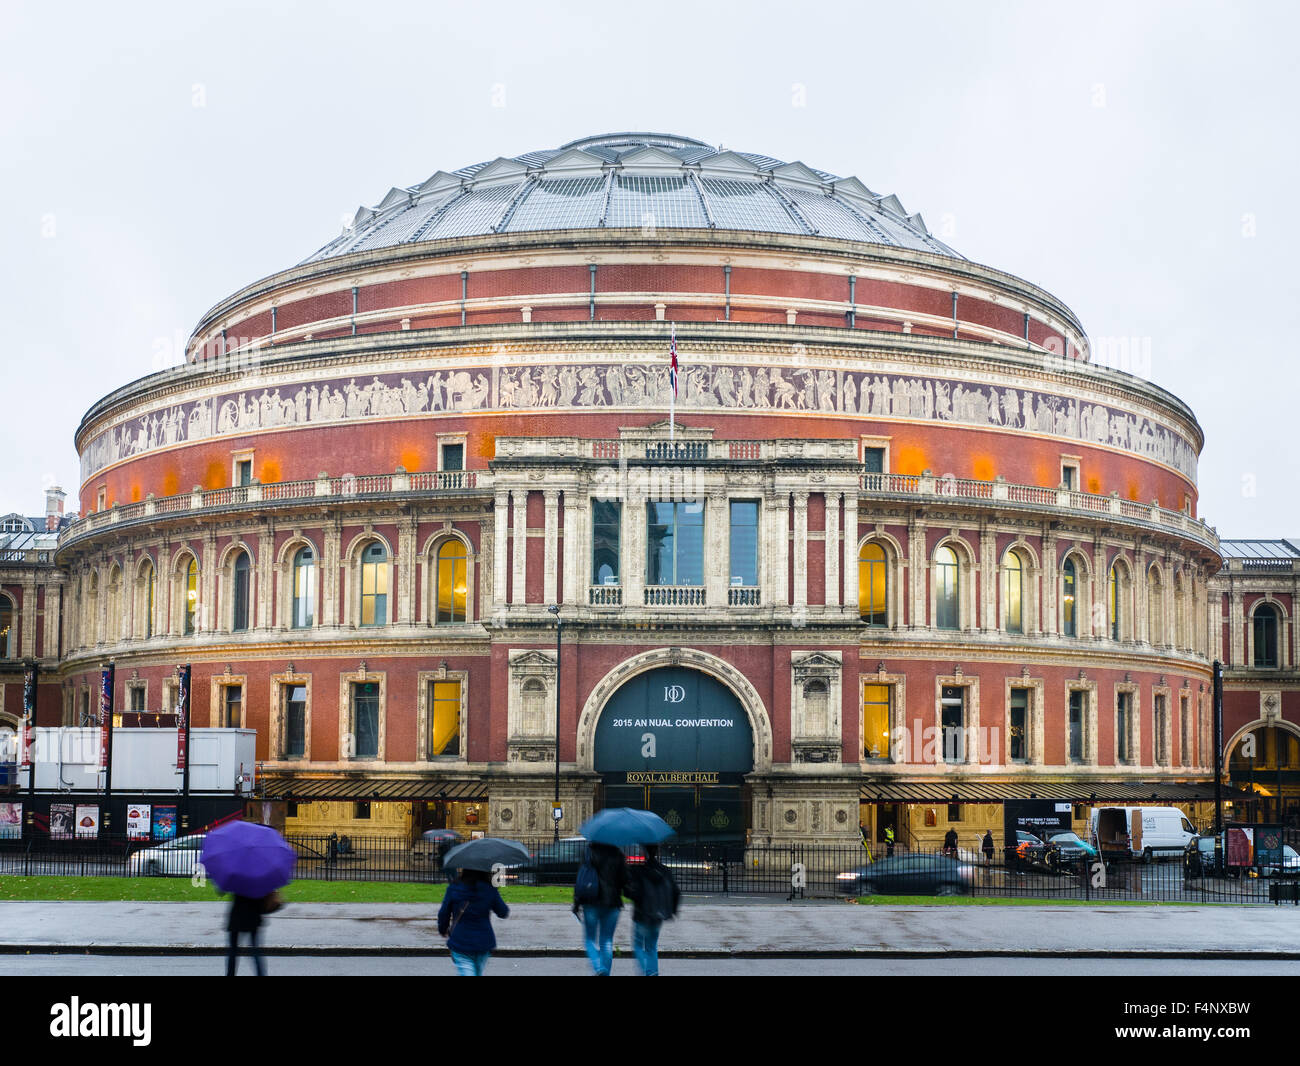 Royal Albert Hall, London, a concert hall opened in 1871 by Queen Victoria in memory of her late husband, Prince Albert. Stock Photo